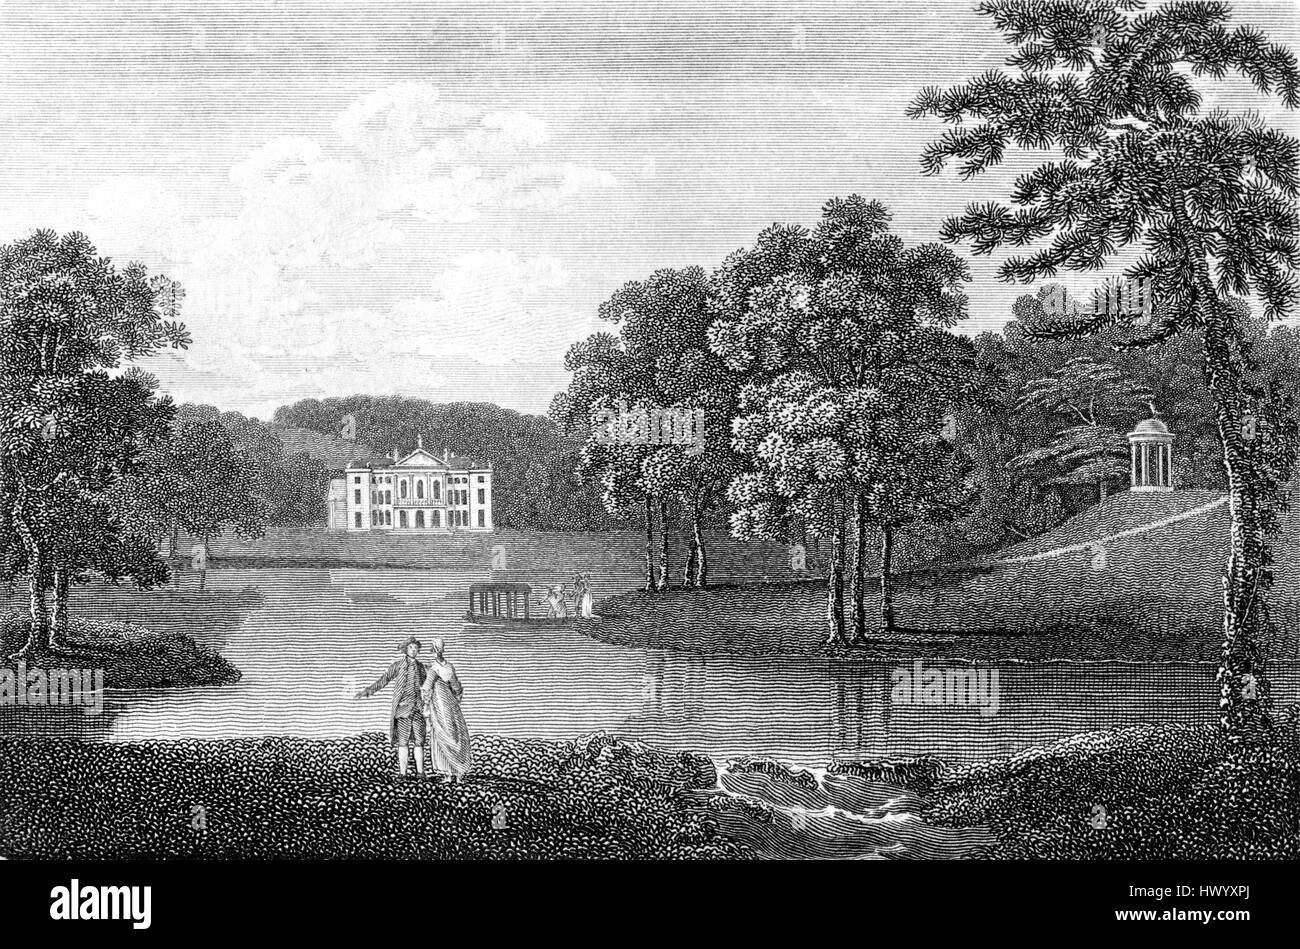 An engraving of Wycombe House, Buckinghamshire scanned at high resolution from a book printed in 1812.  .Believed copyright free. Stock Photo